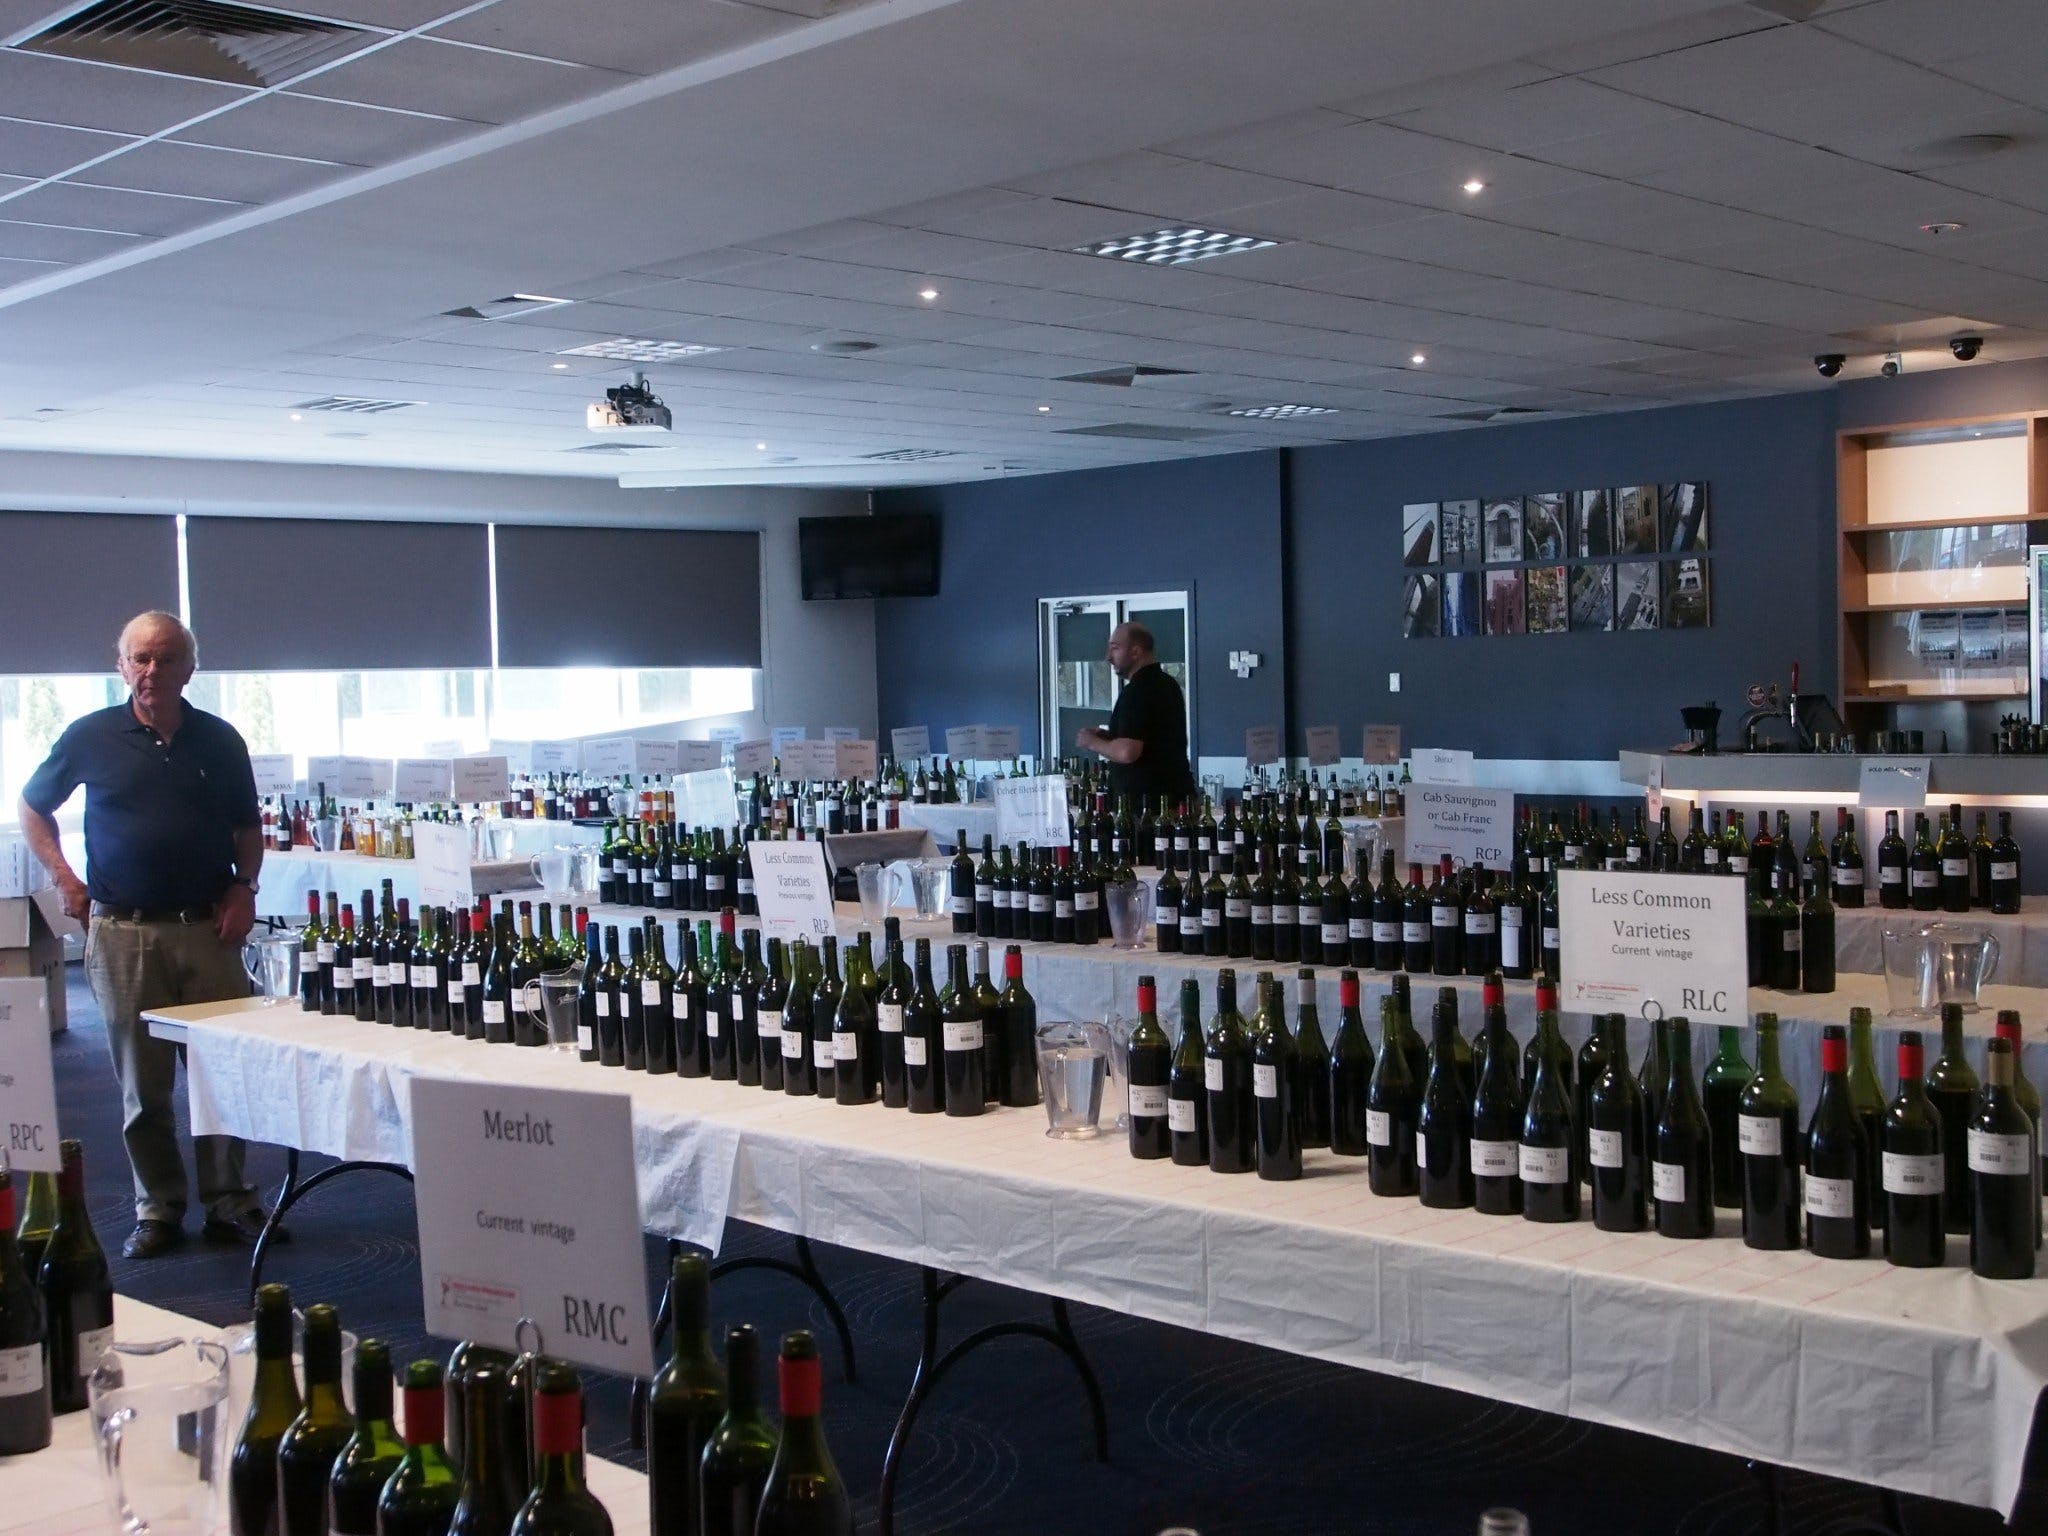 Eltham and District Wine Guild Annual Wine Show - 51st Annual Show - Townsville Tourism